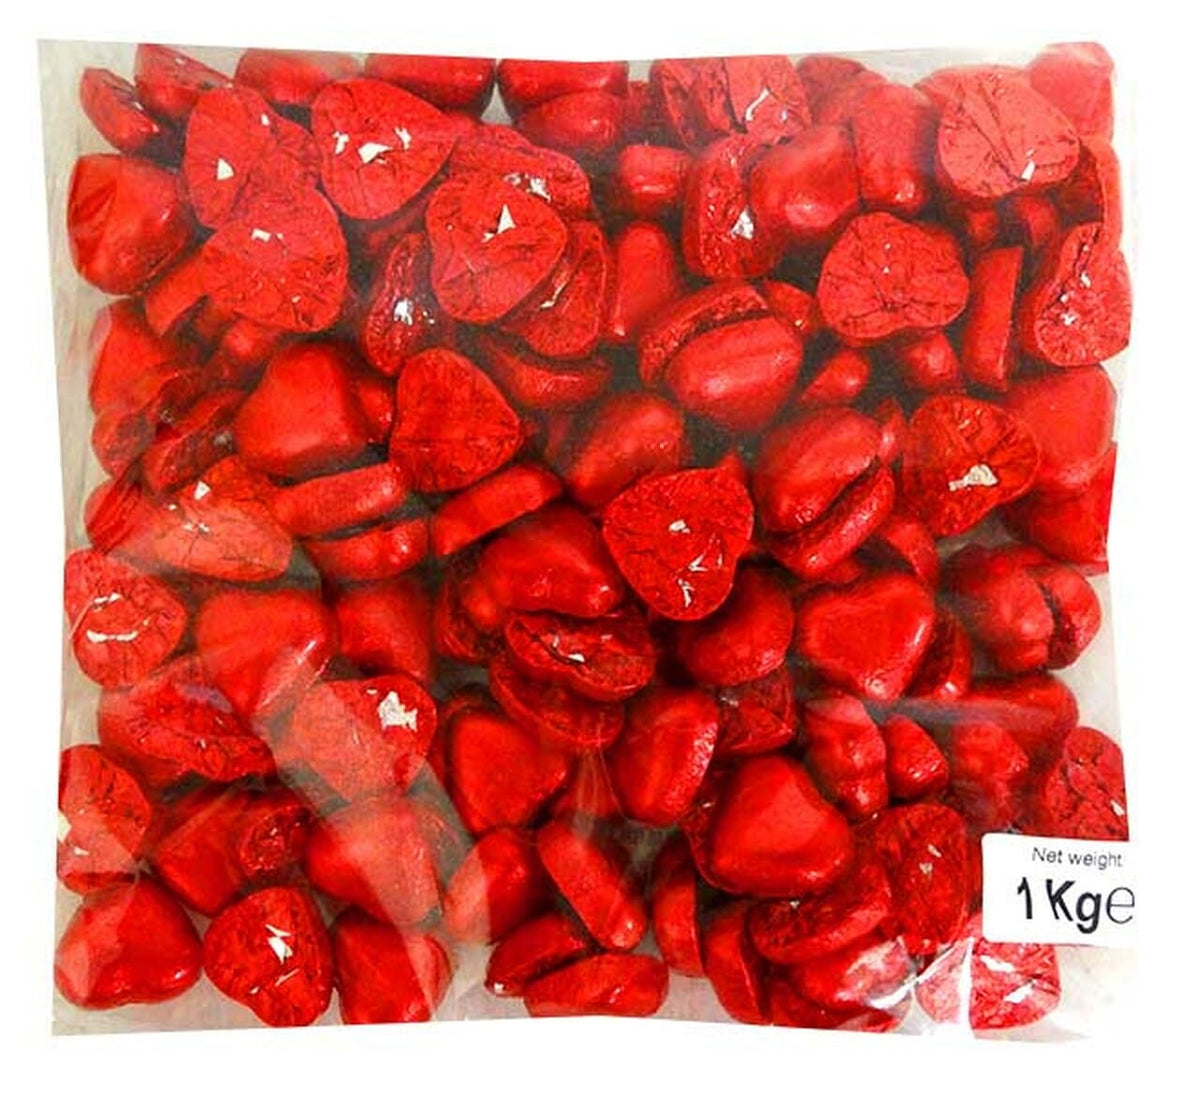 Red Foil Covered Imported Chocolate Hearts 1 Kg Goody Goody Gum Drops online lolly shop